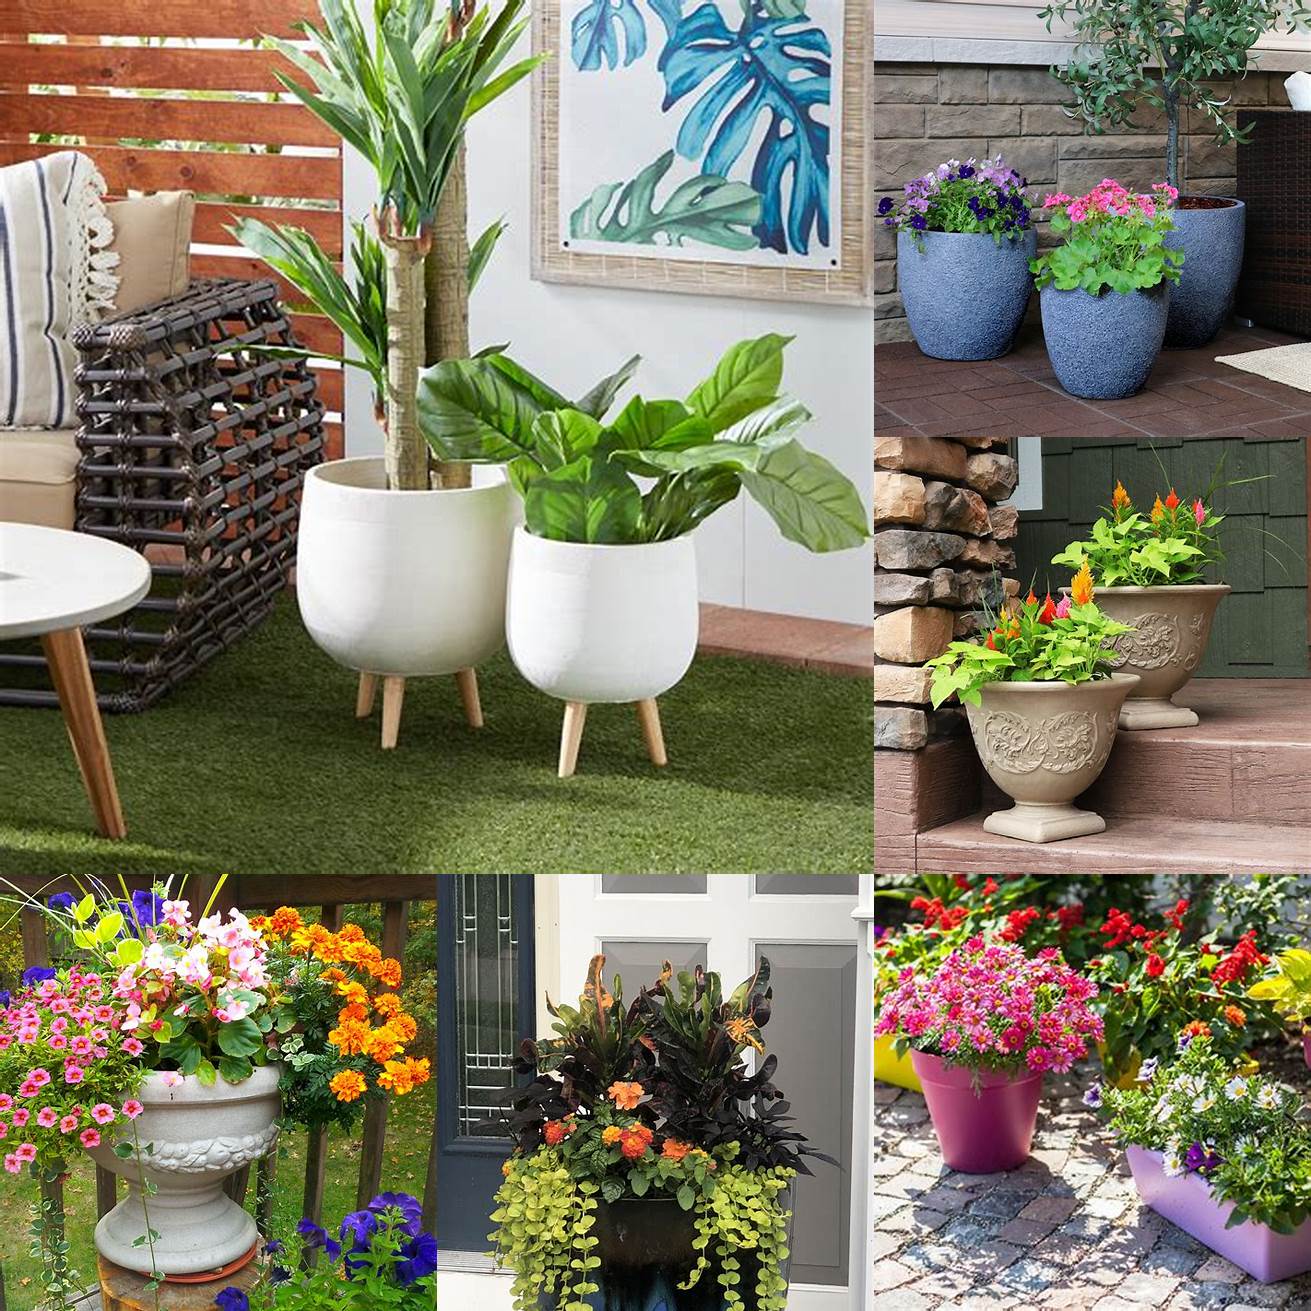 Vases and planters Plants and flowers can bring life and color to any space